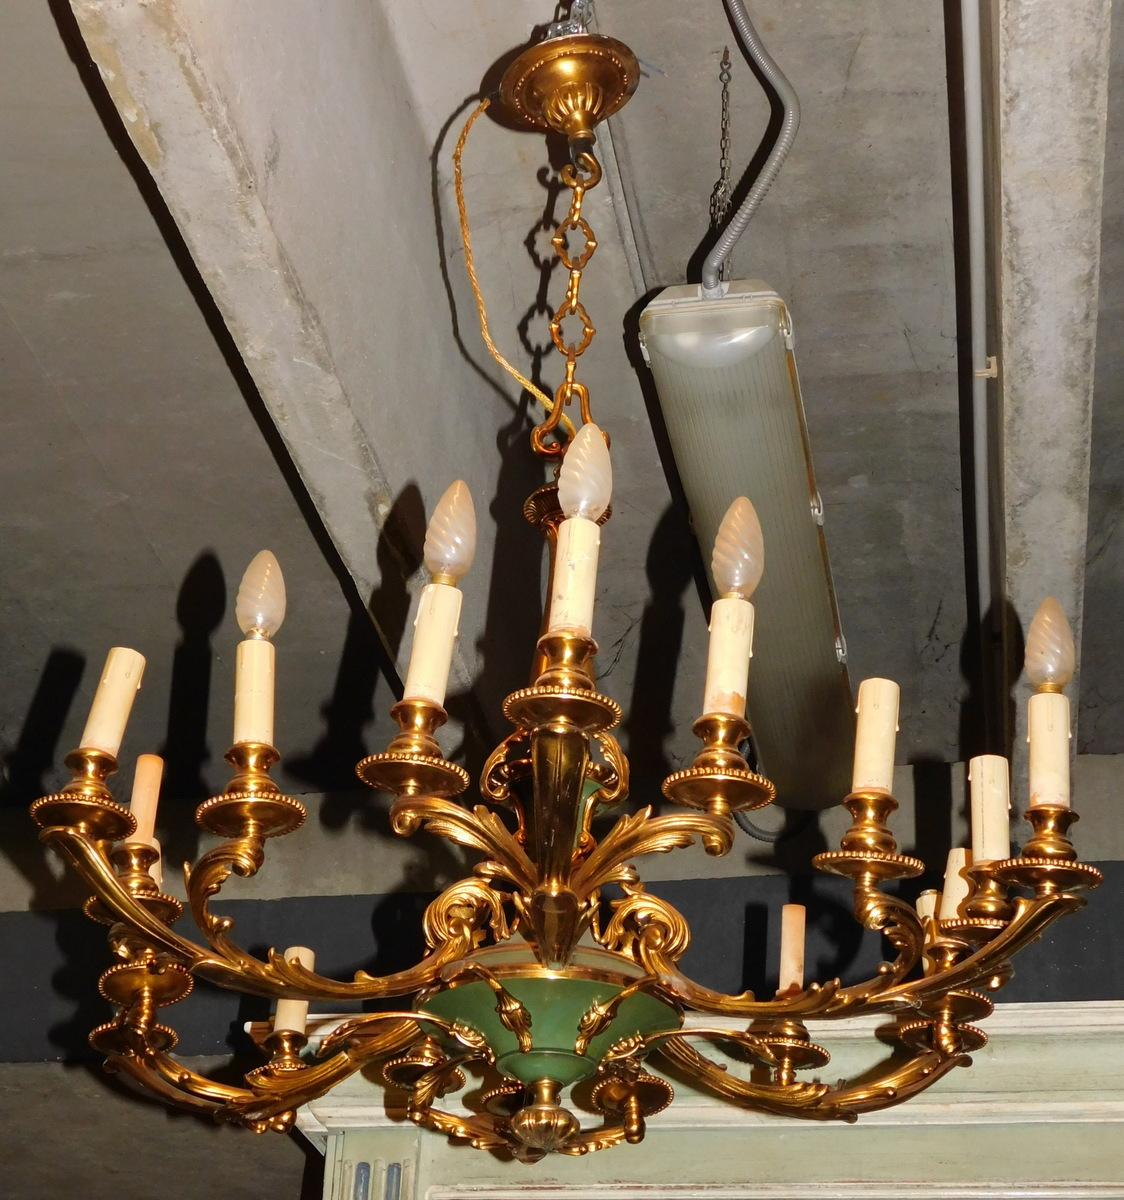 Ceiling Chandelier Lamp, 18 Lights, Gilded Brass, Italian Liberty '900 For Sale 2